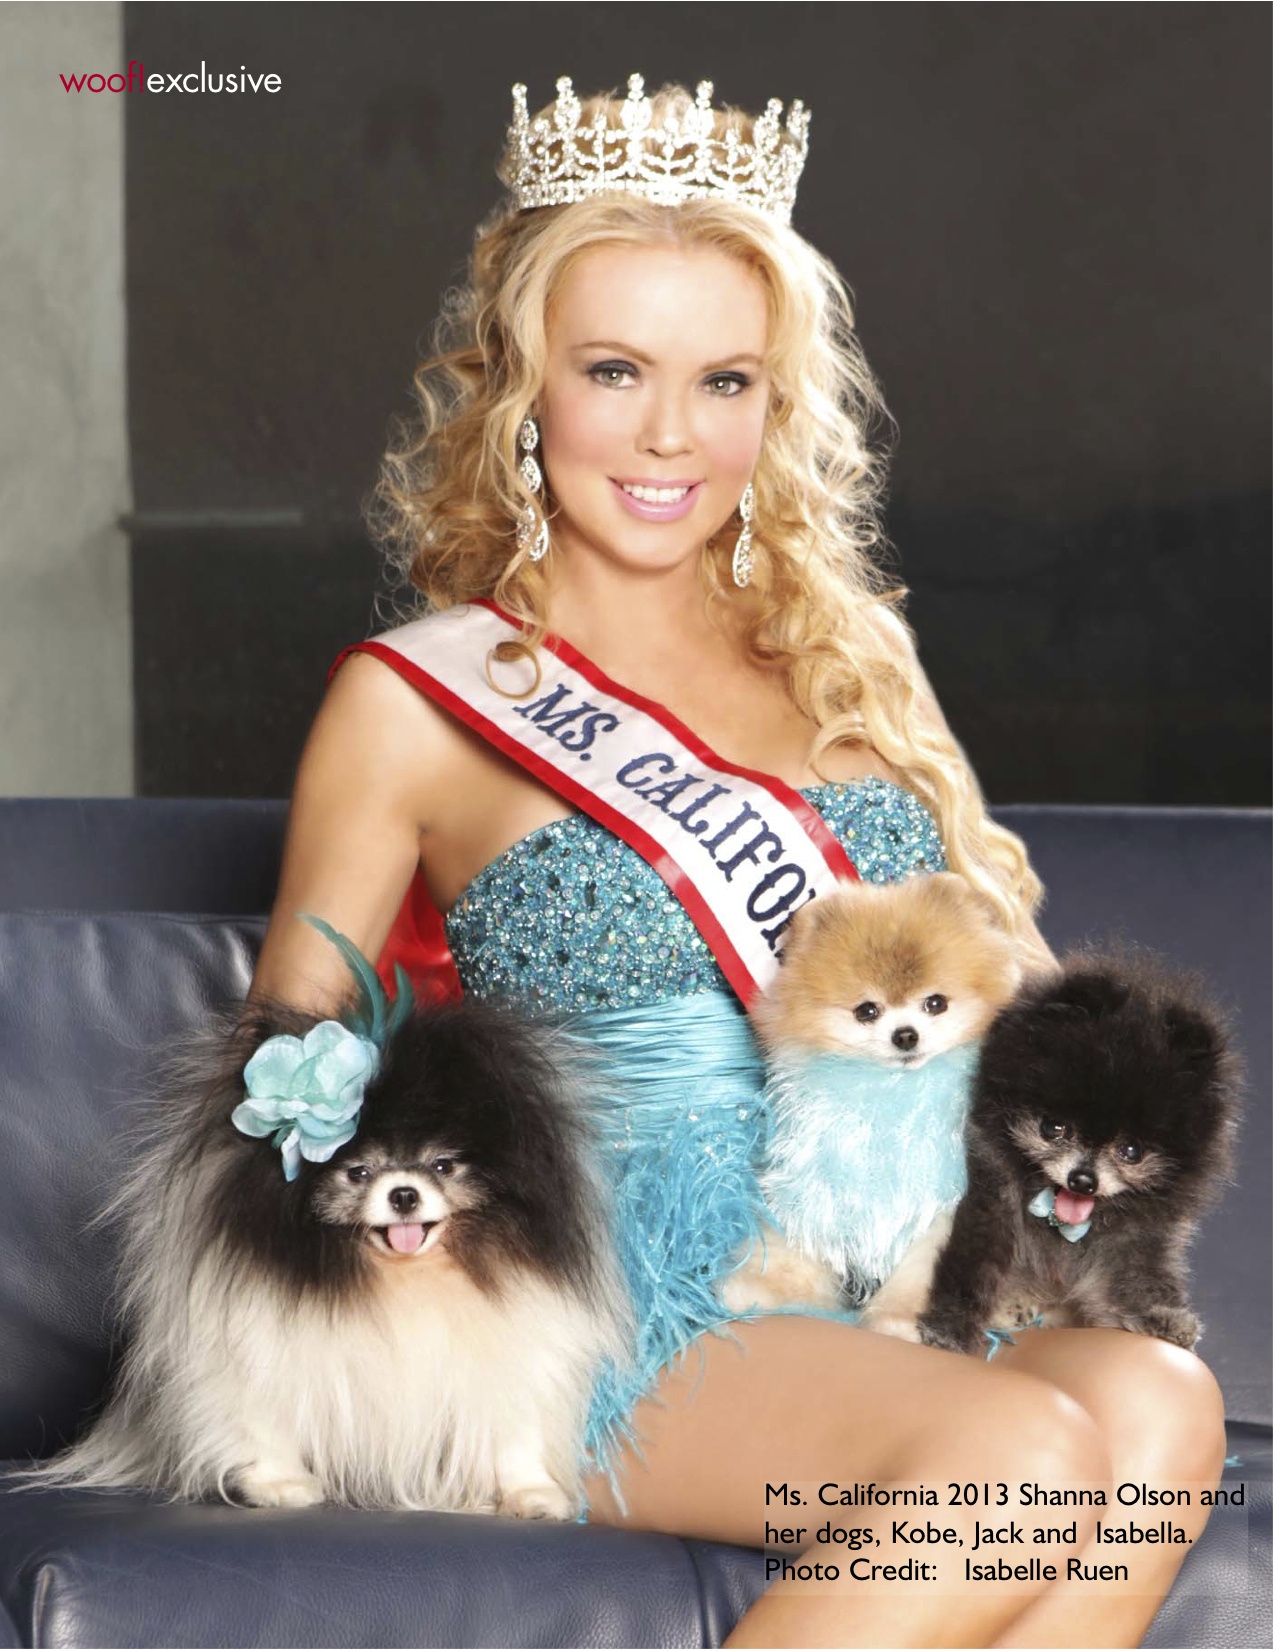 Ms. California Shanna Olson and her dogs, Woof Magazine feature